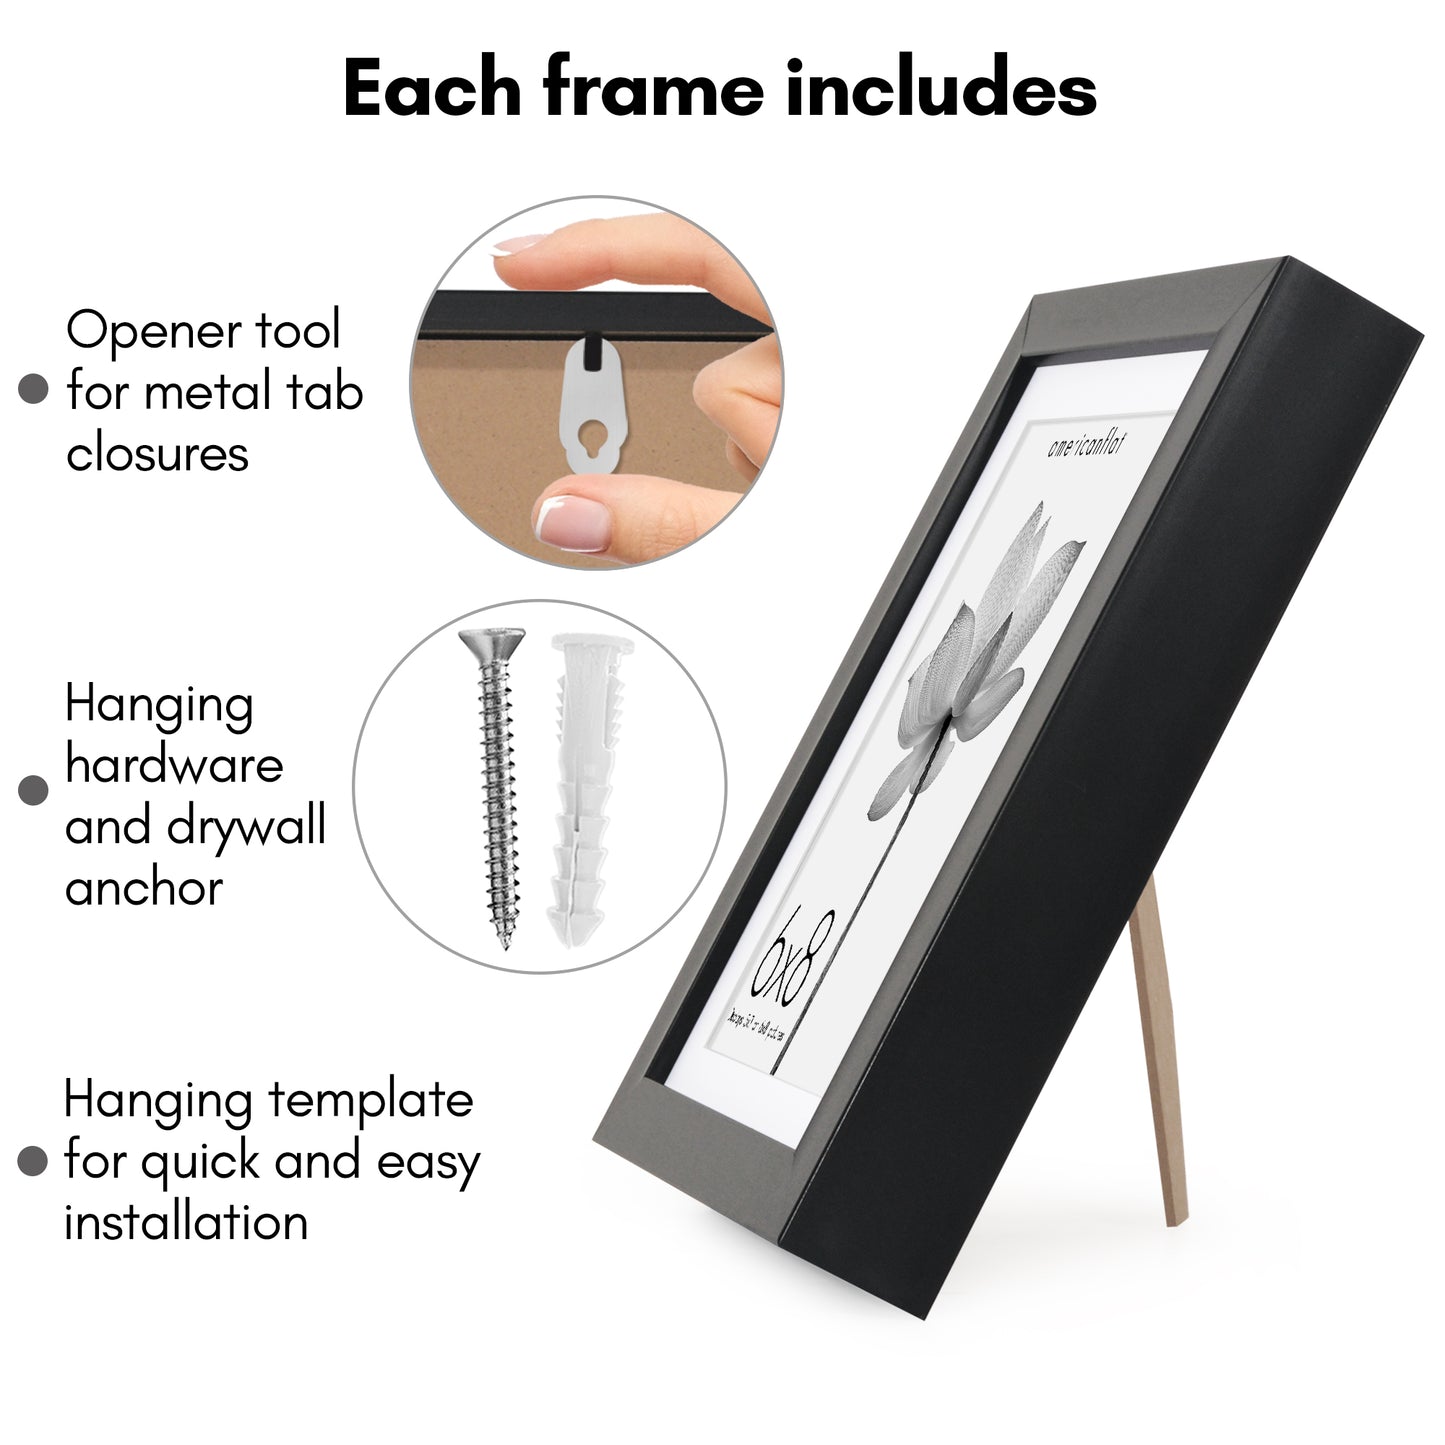 Deep Molding Picture Frame with Mat | Choose Size and Color